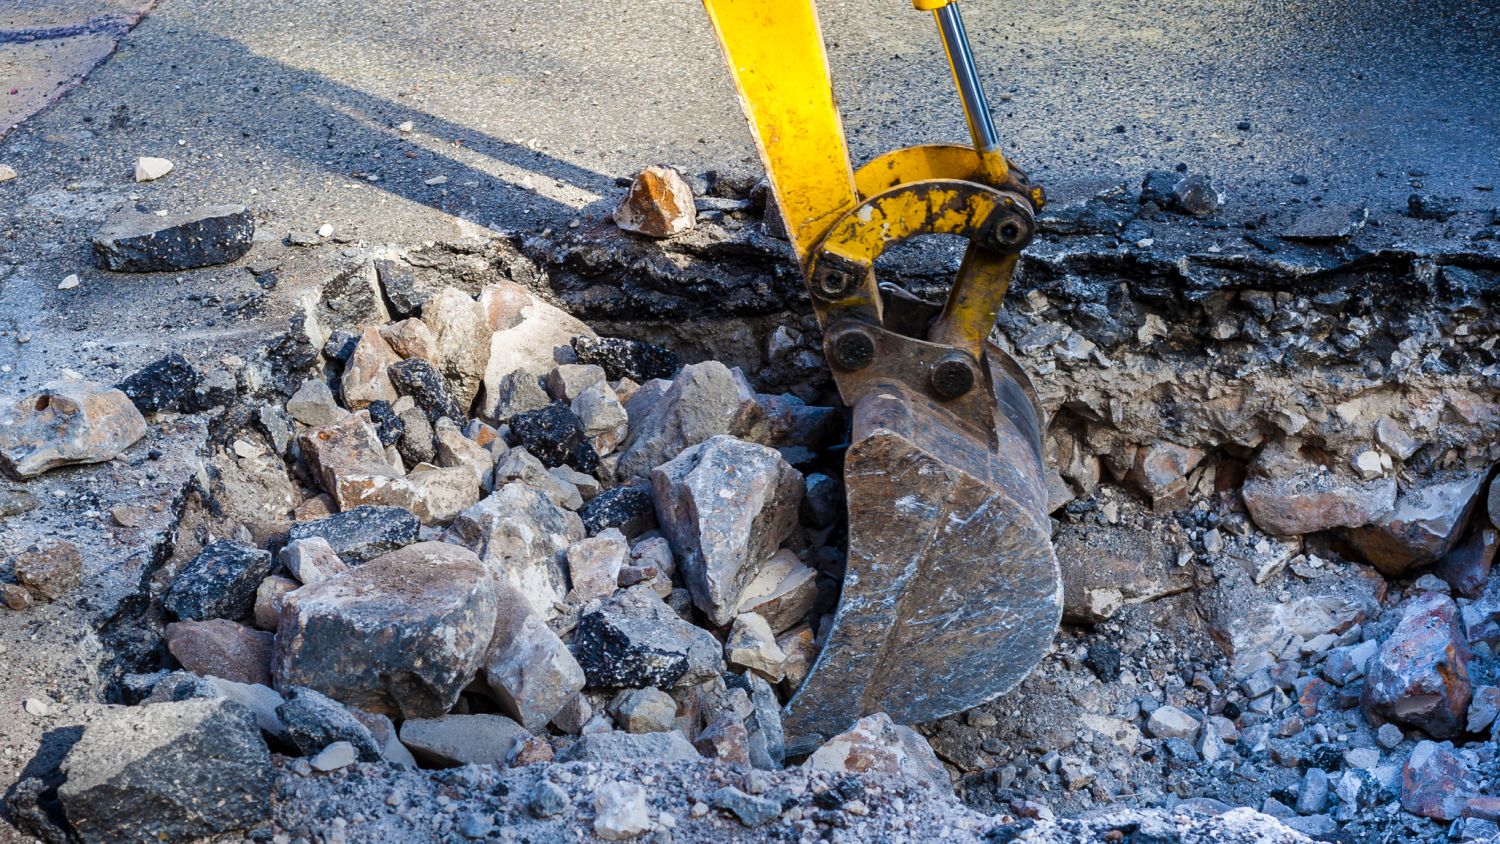 Digging in busy towns and cities poses the risk of cable strike (Image: Dreamstime)